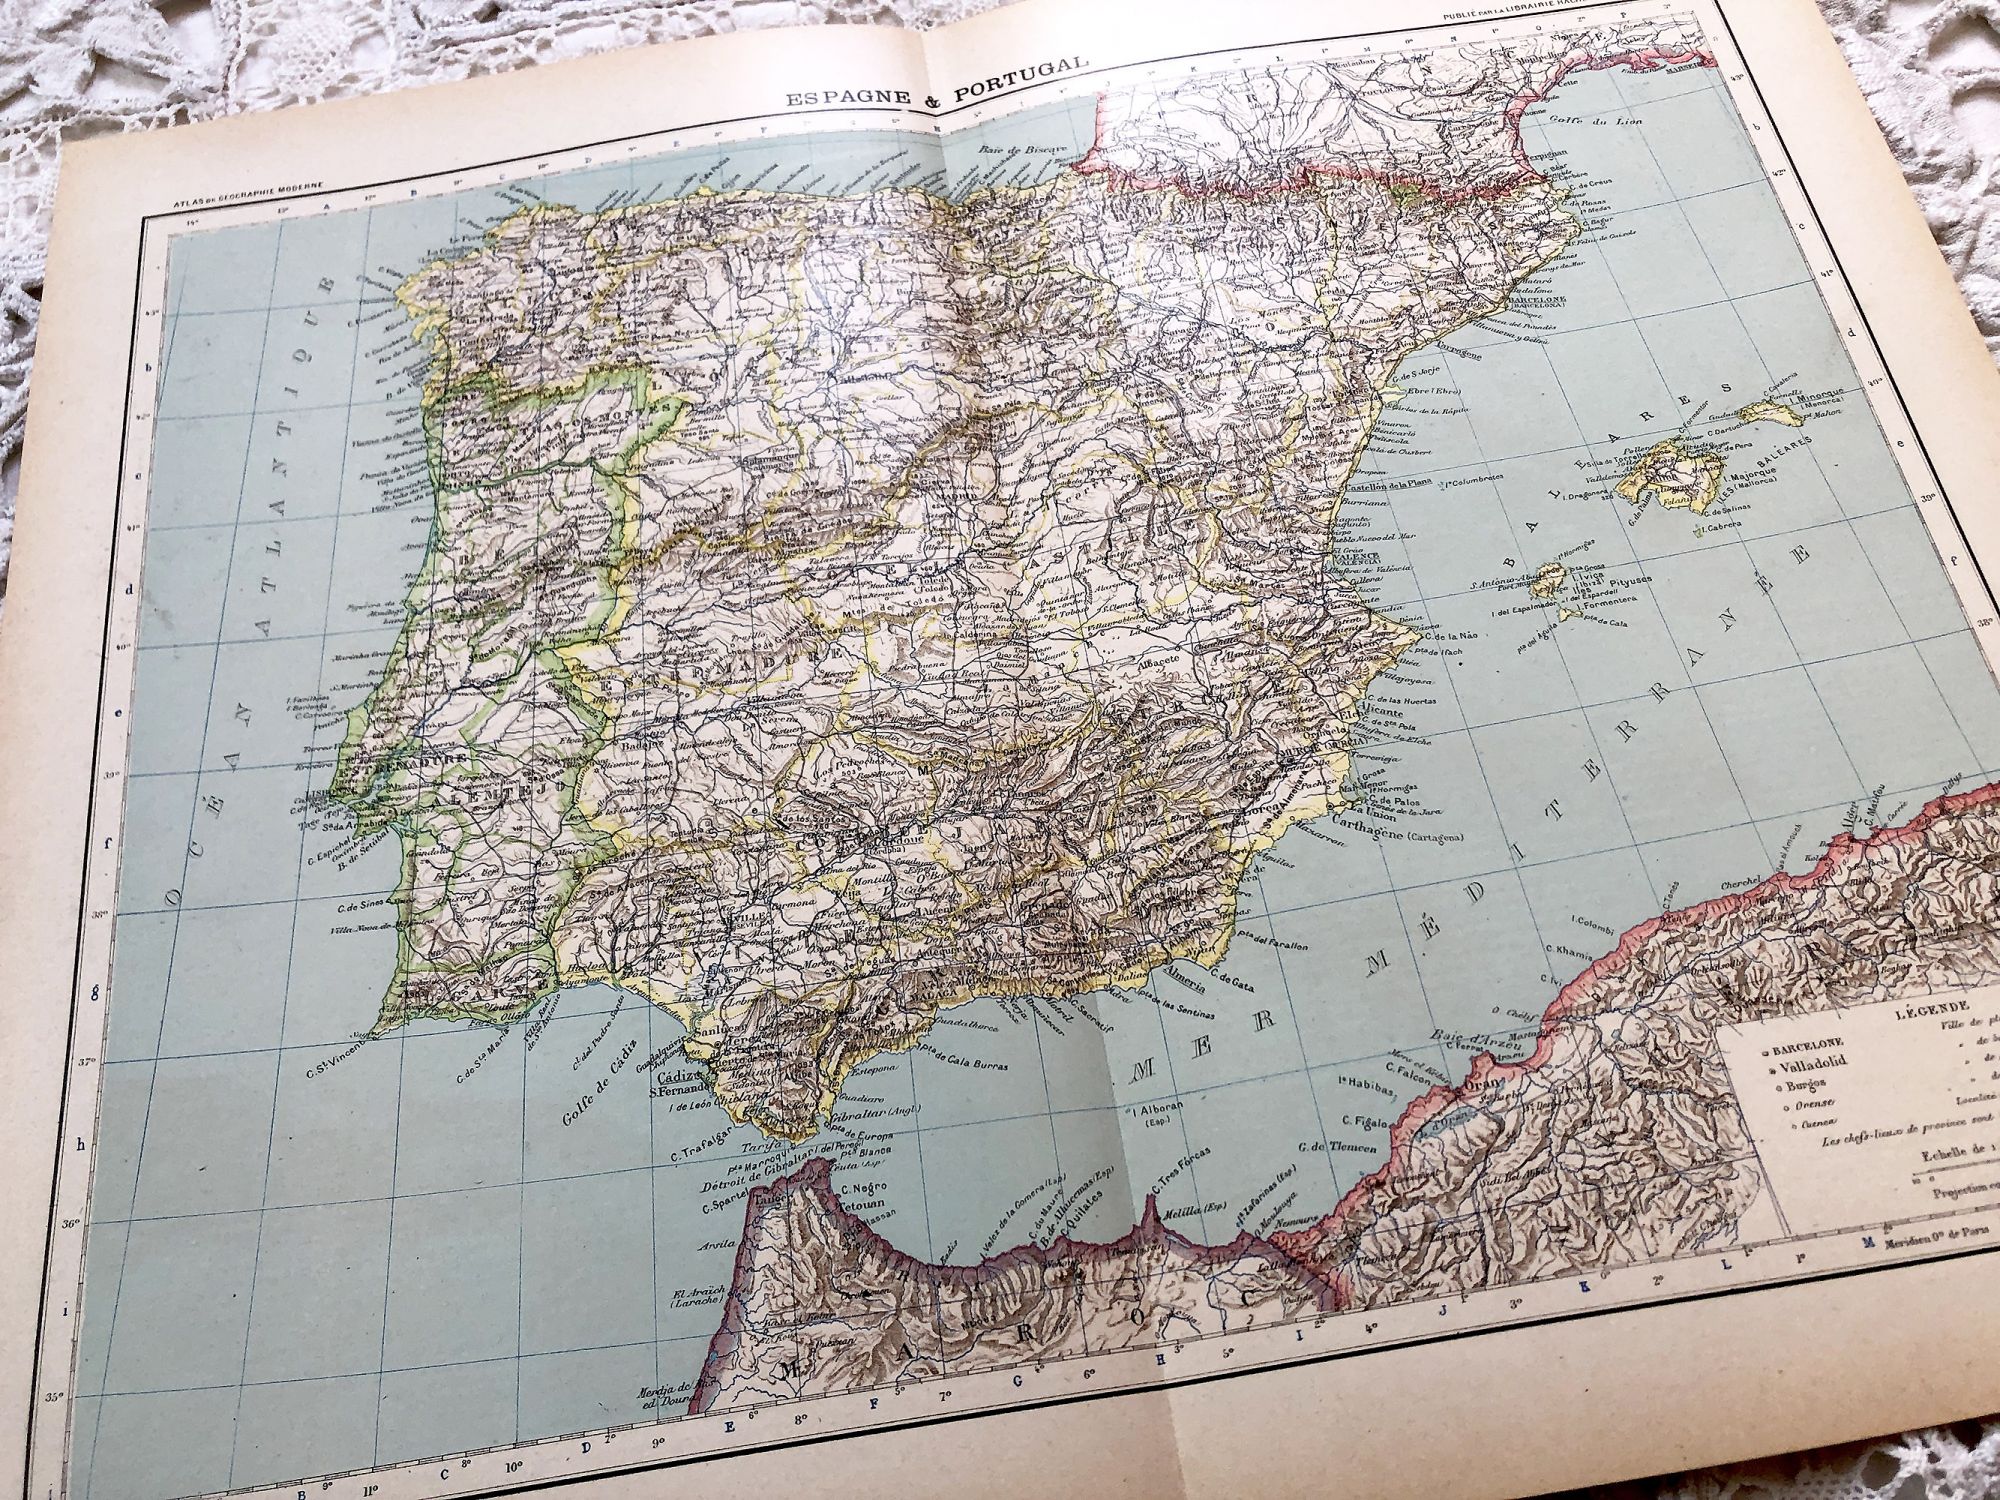 Large vintage map of Spain and Portugal in 1910 from a French atlas of the 1910s